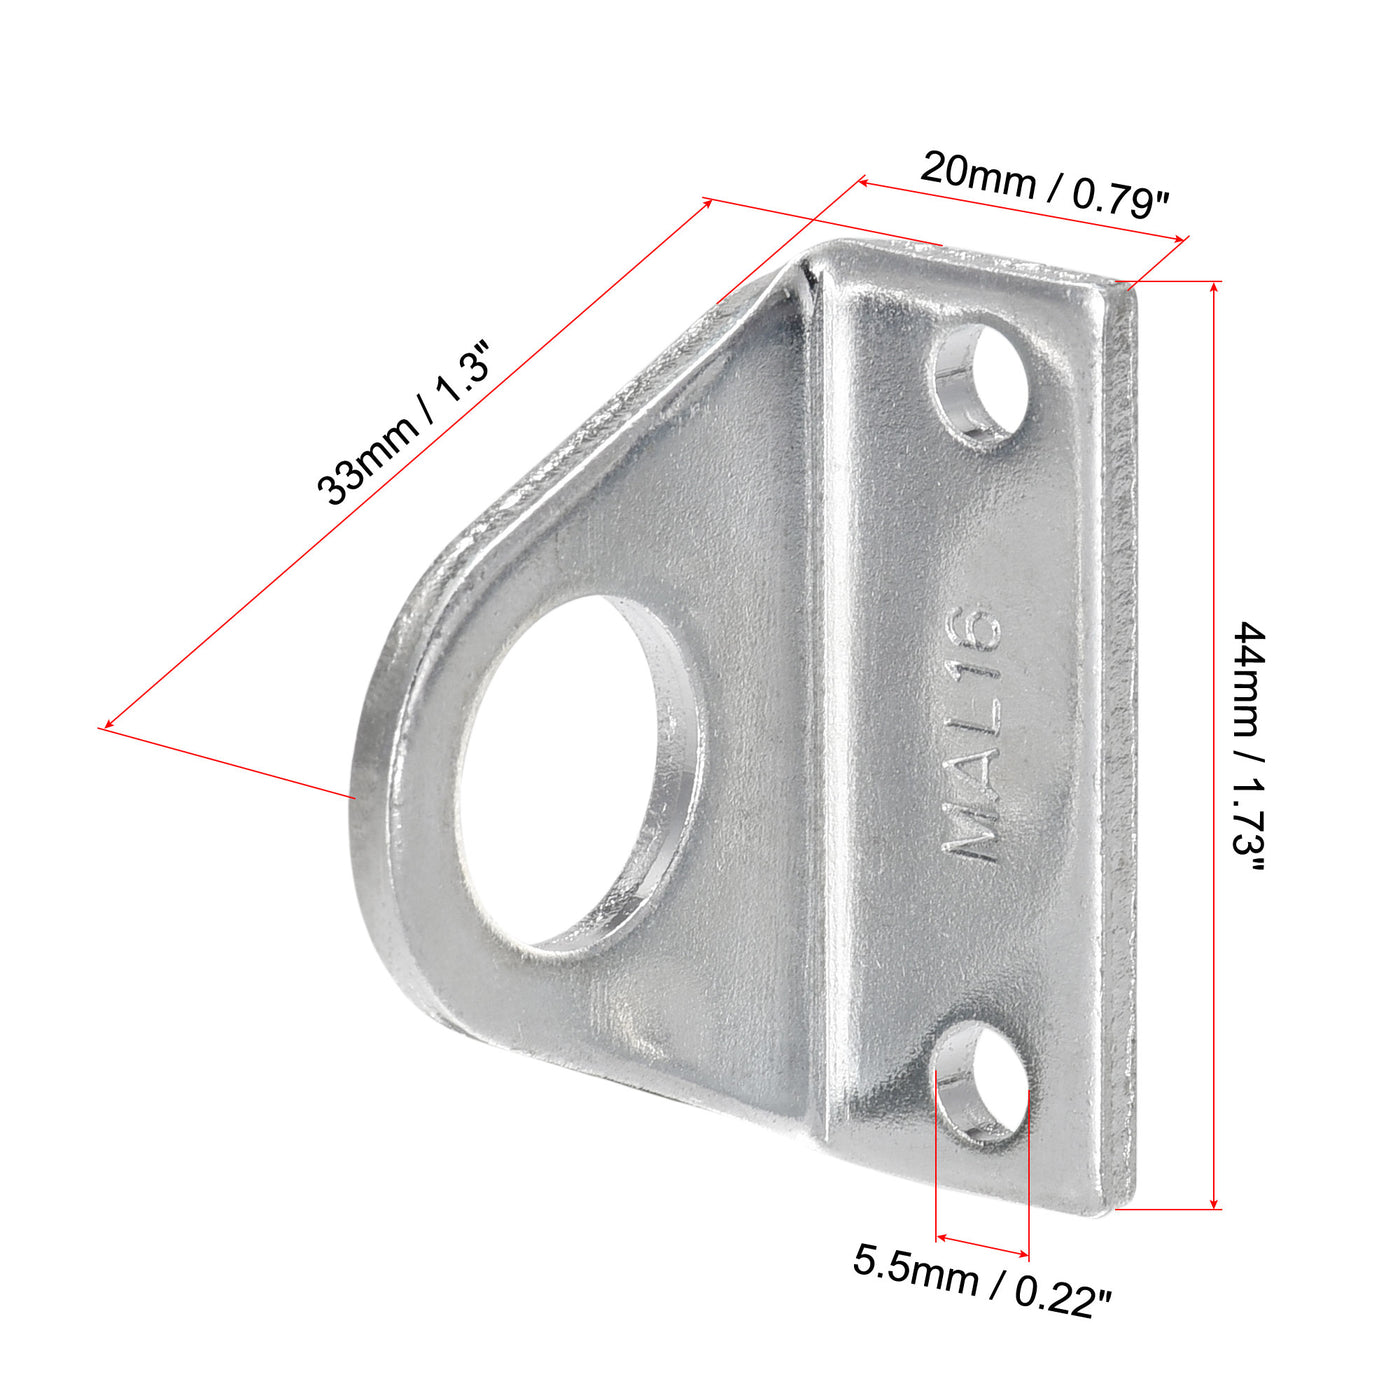 uxcell Uxcell Air Cylinder Rod Clevis Mounting Bracket 2 Bolt Holes MA/MAL Pneumatic Parts for 16mm Cylinder Bore, 2pcs